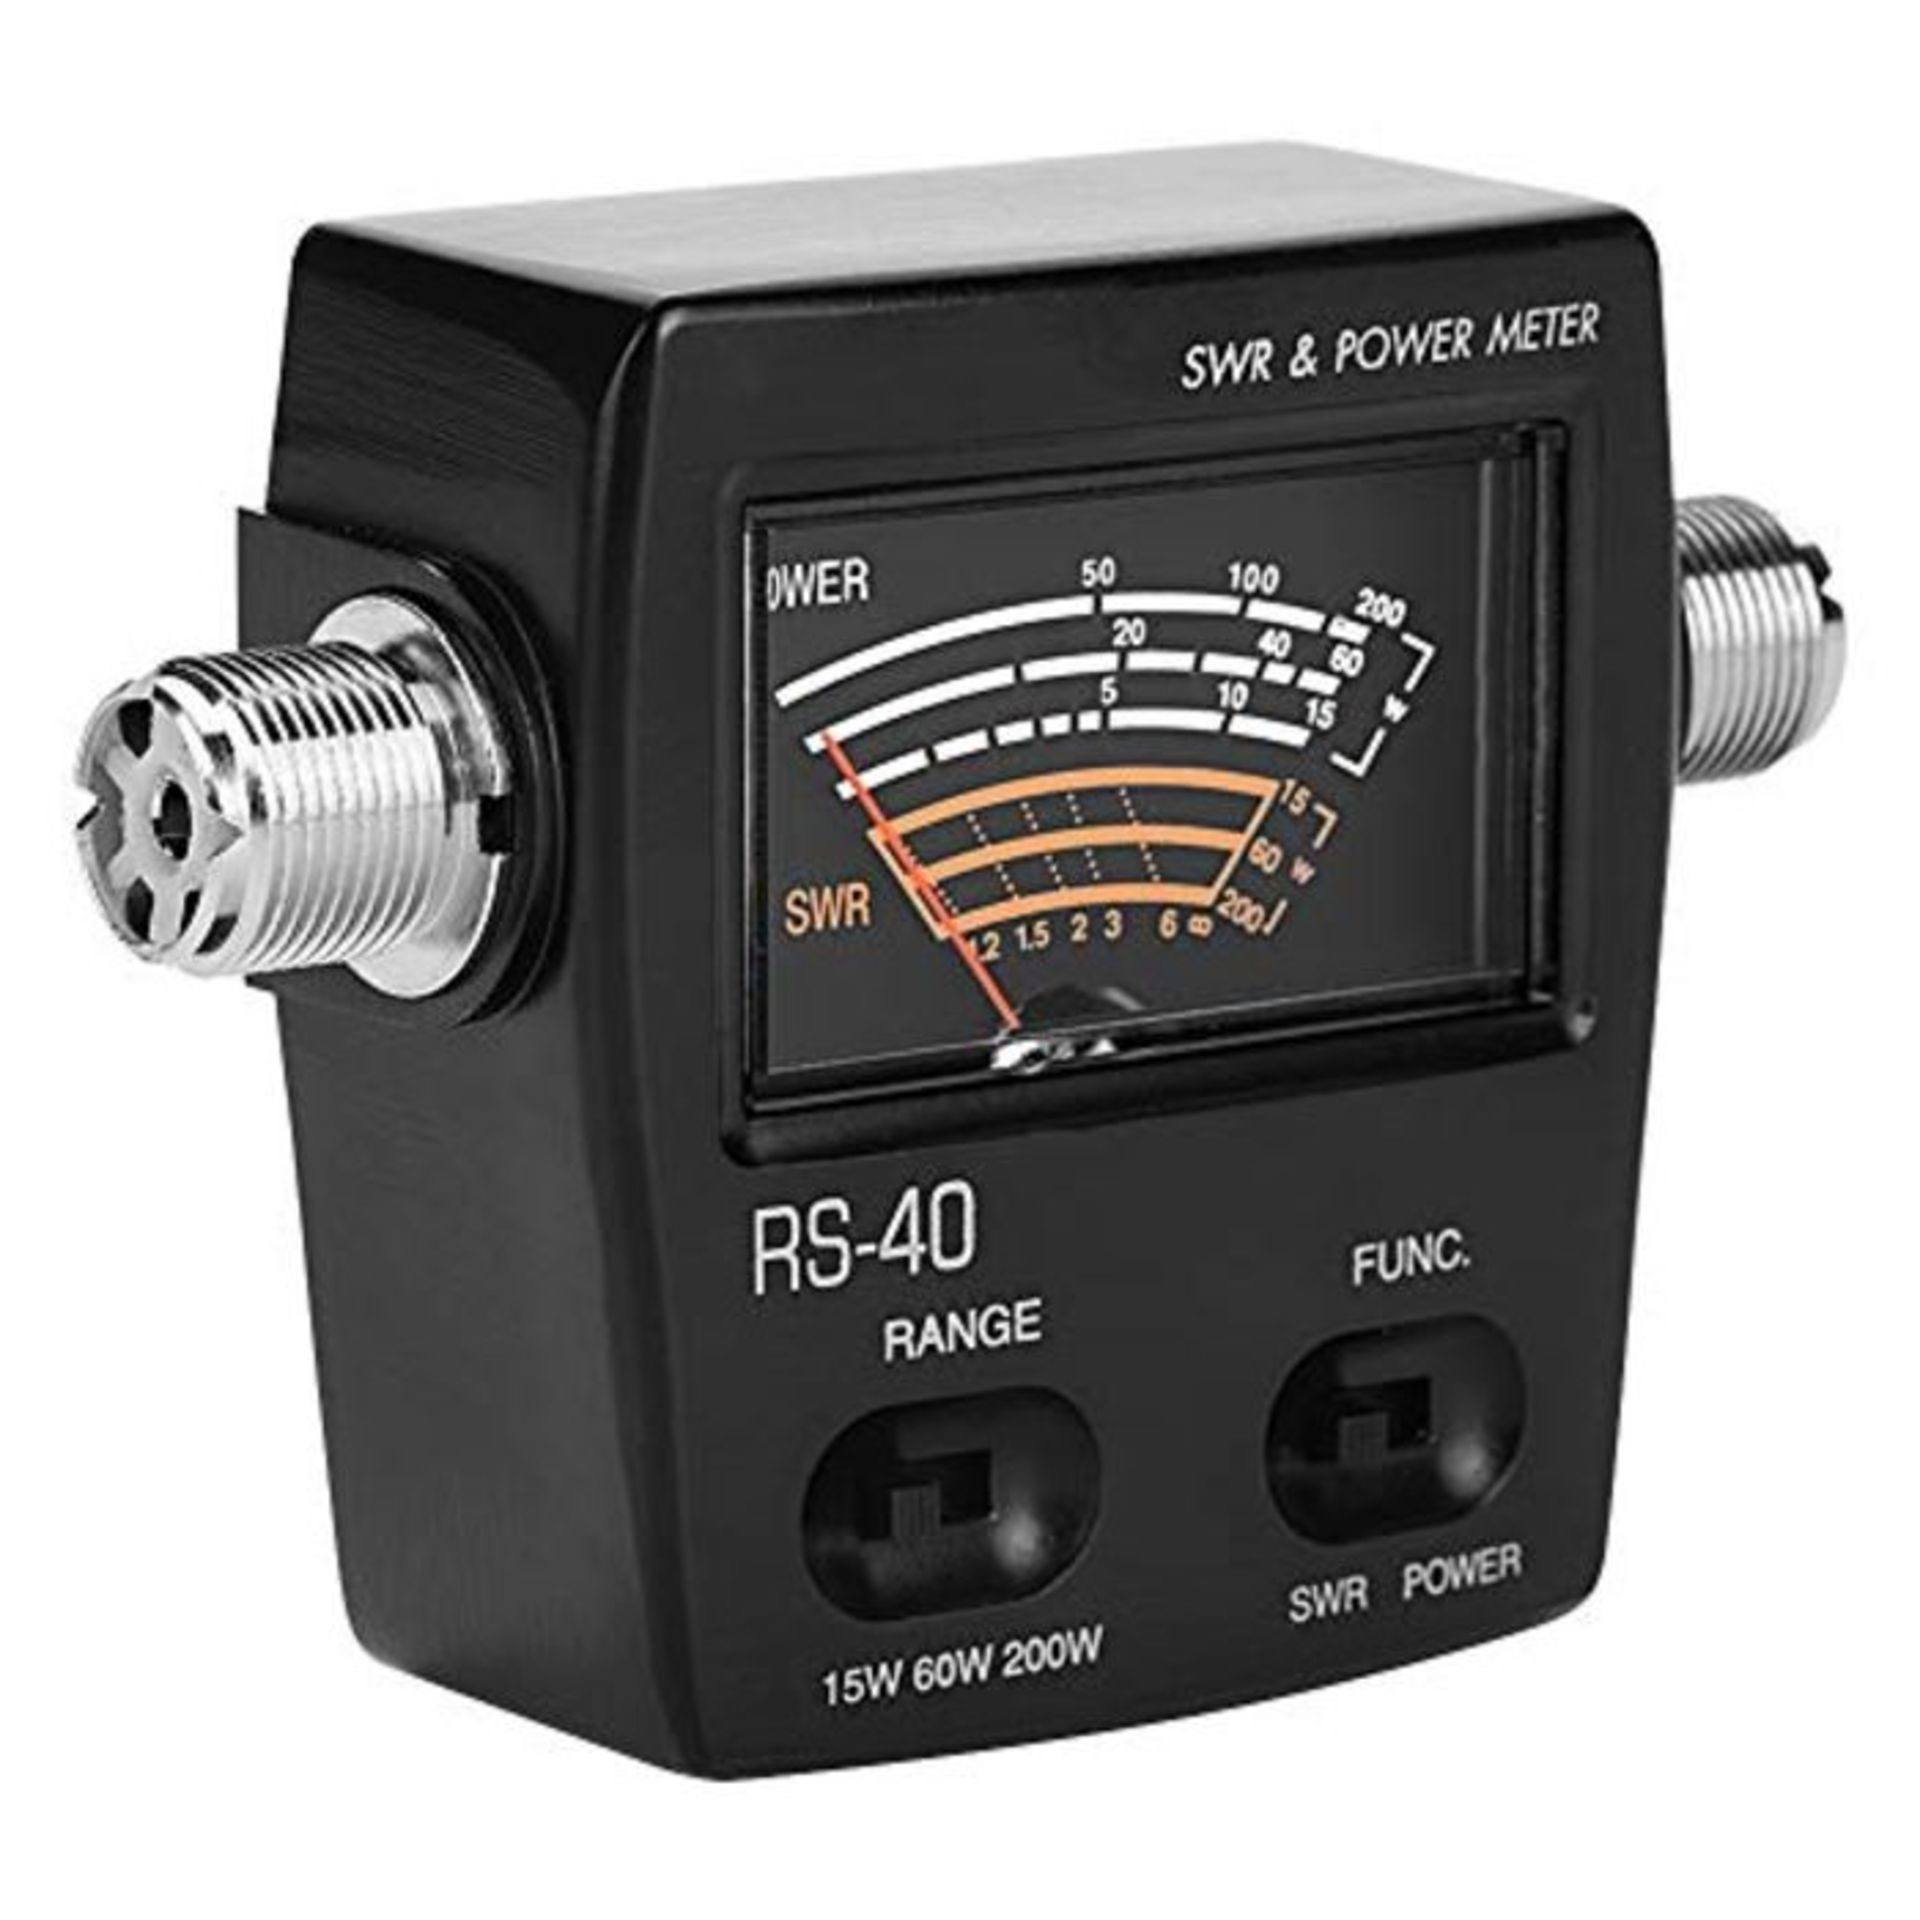 Professional UV Dual Band Standing-Wave Meter Power Meter SWR/Power Meter, Highly Accu - Image 3 of 4